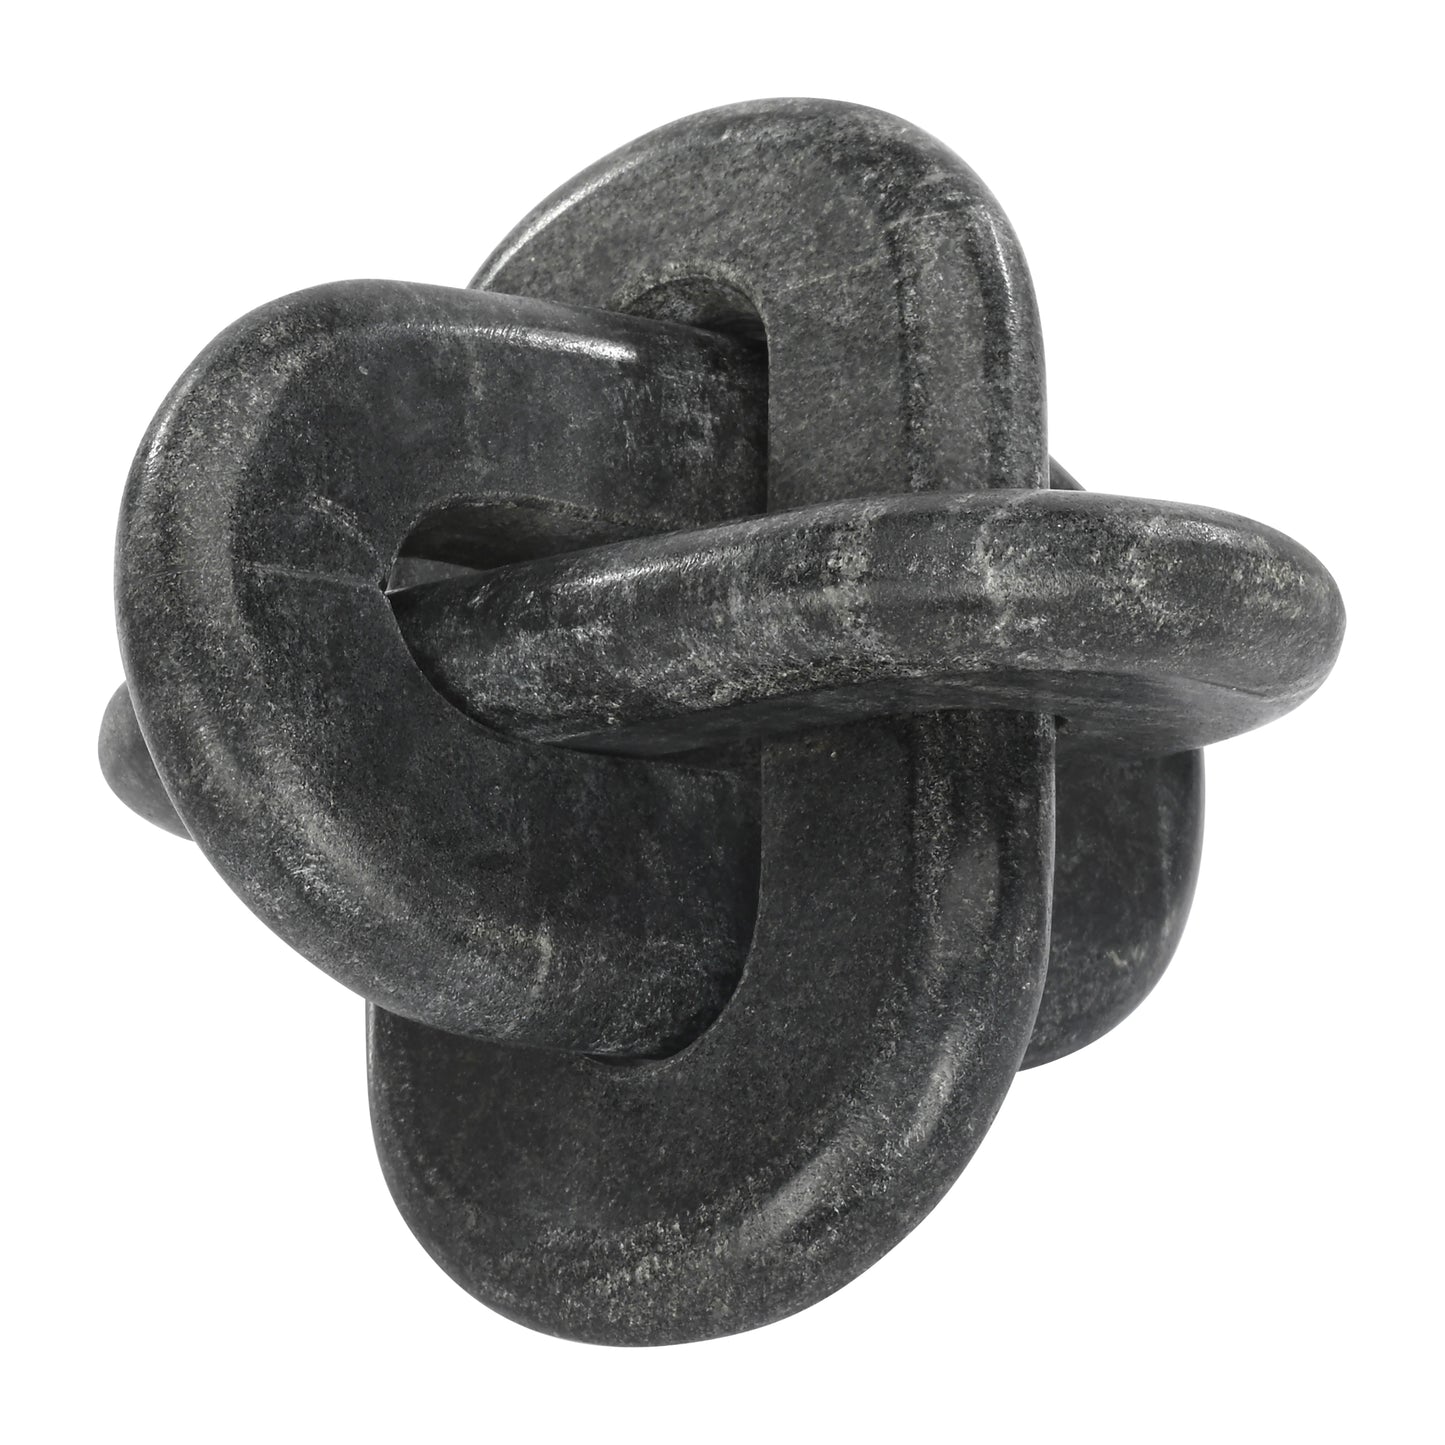 All Tied Up Marble Knot Object